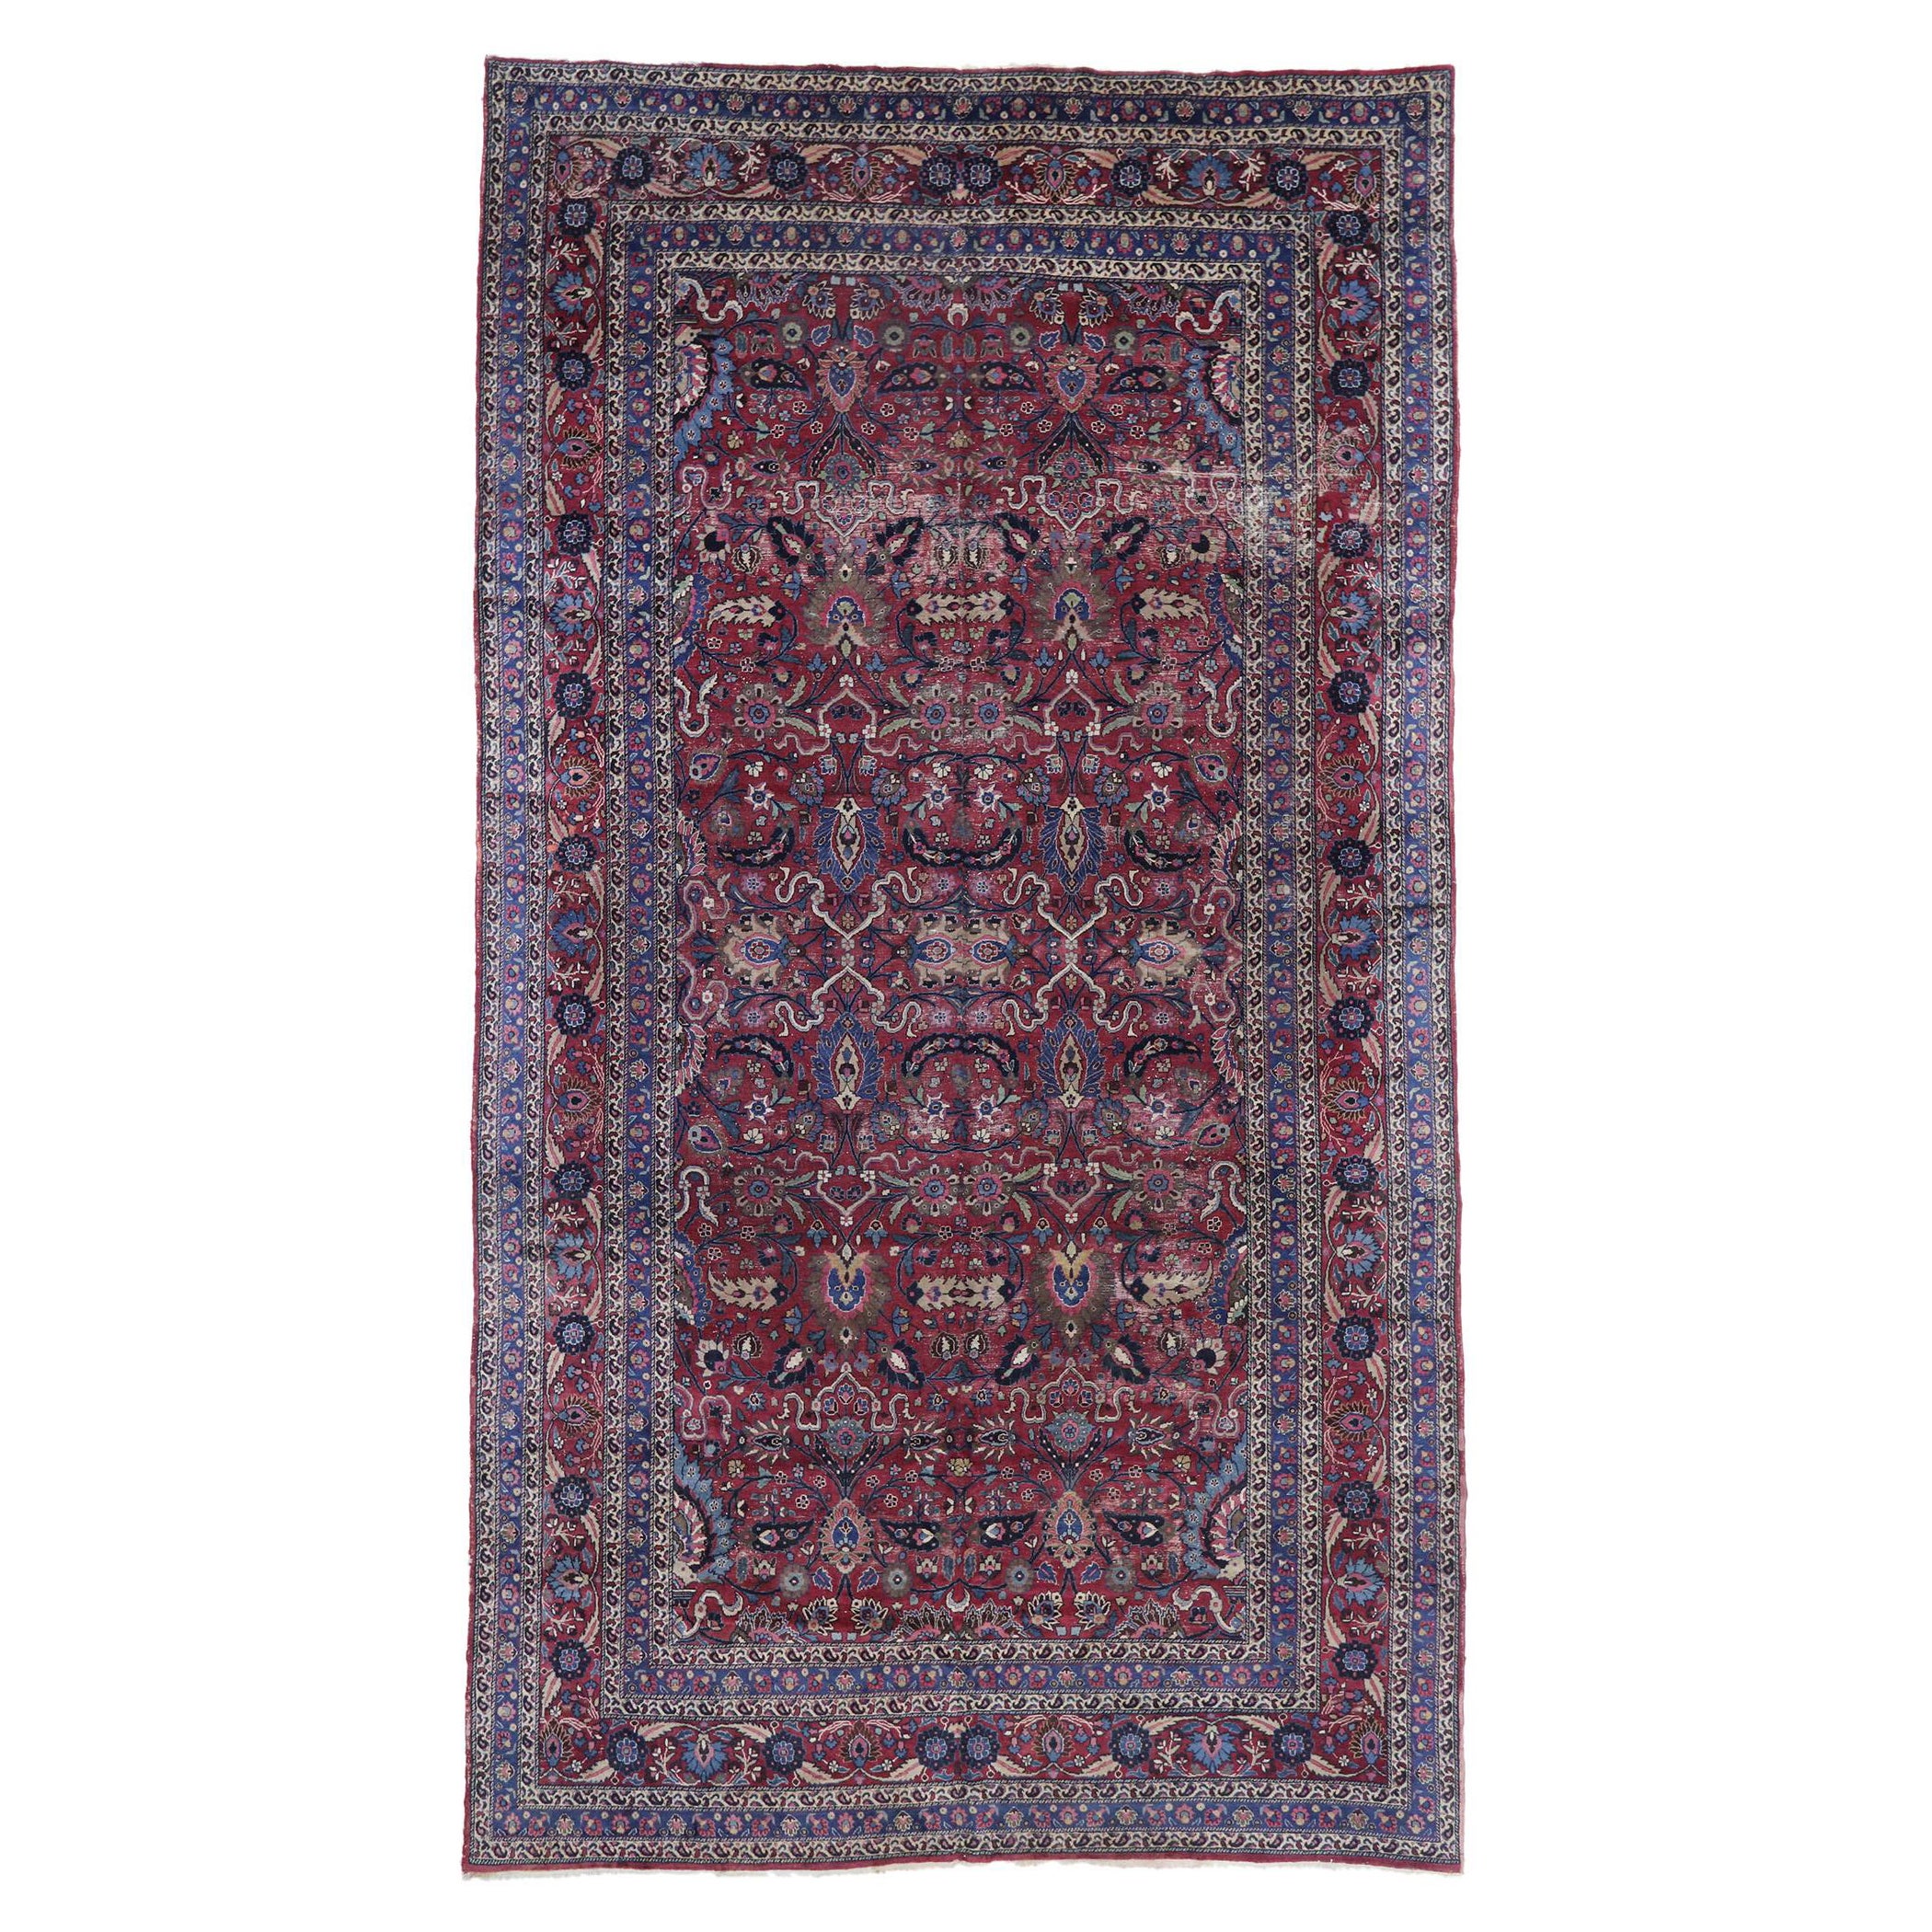 Antique Persian Mashhad Rug with Rustic Victorian Style For Sale